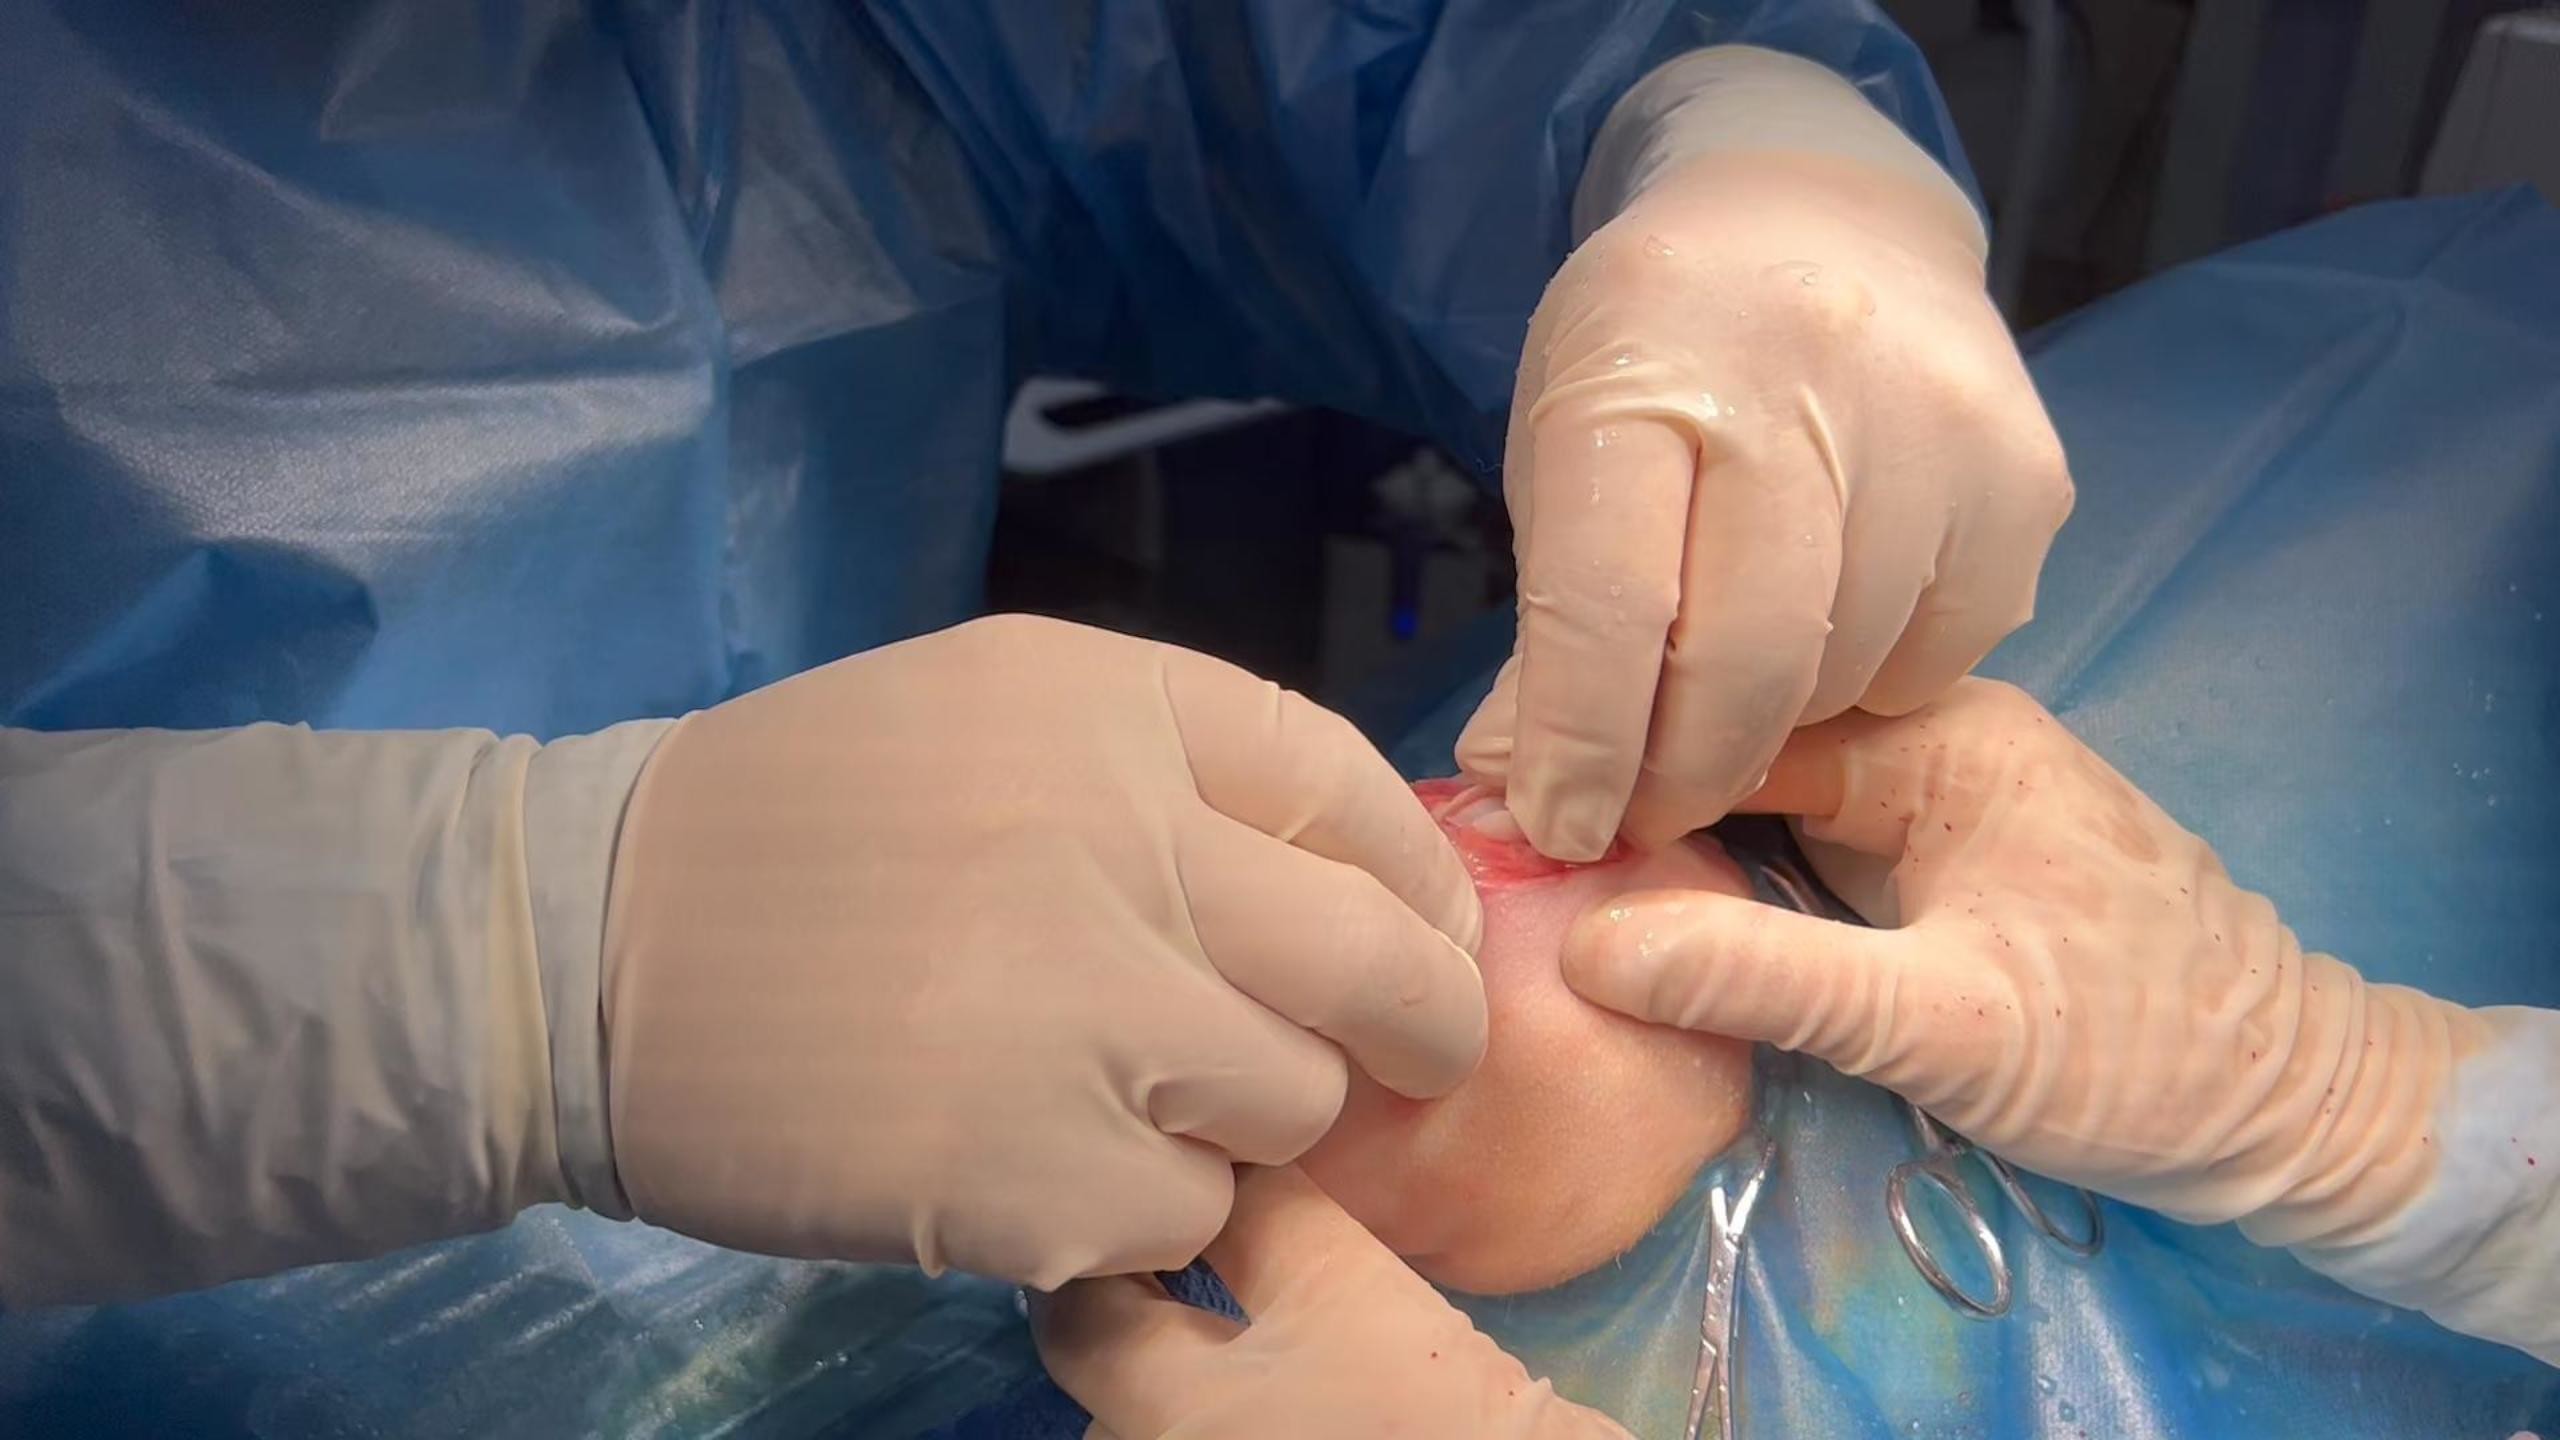 Latest company case about Dr Shi Patellar Luxation Repair Surgery in a Dog | Surgical Procedures